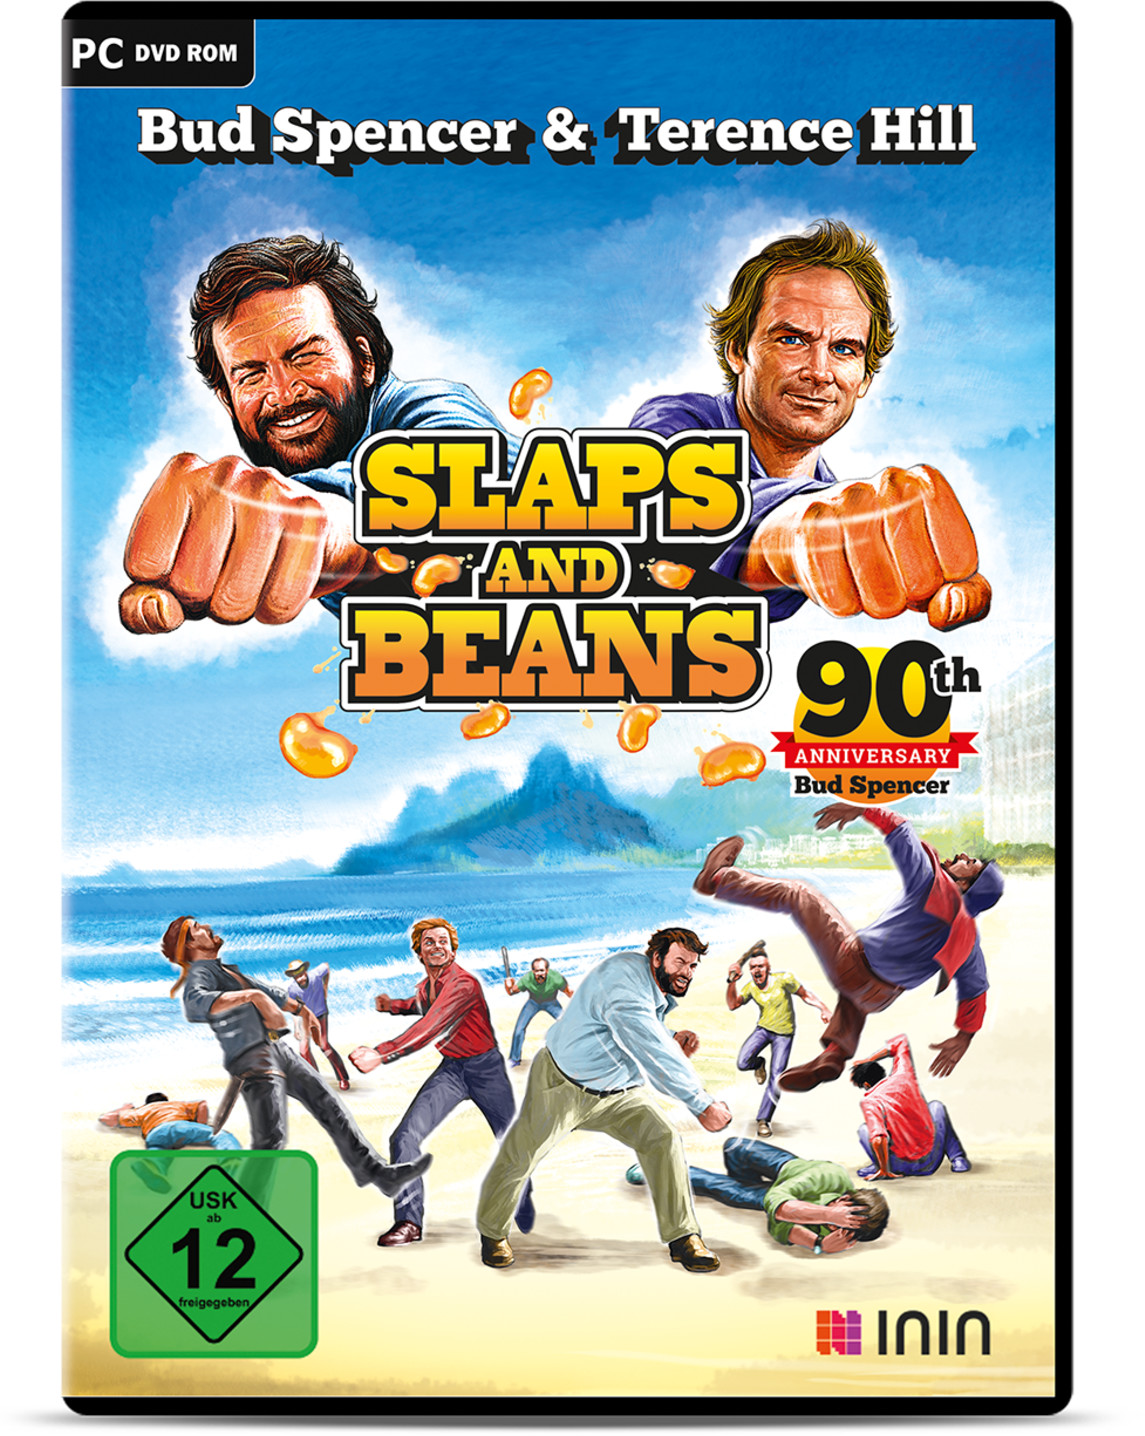 | Beans Bud Preisvergleich Spencer & And Slaps (PC) - bei € ab Hill: Edition Anniversary 34,99 Terence